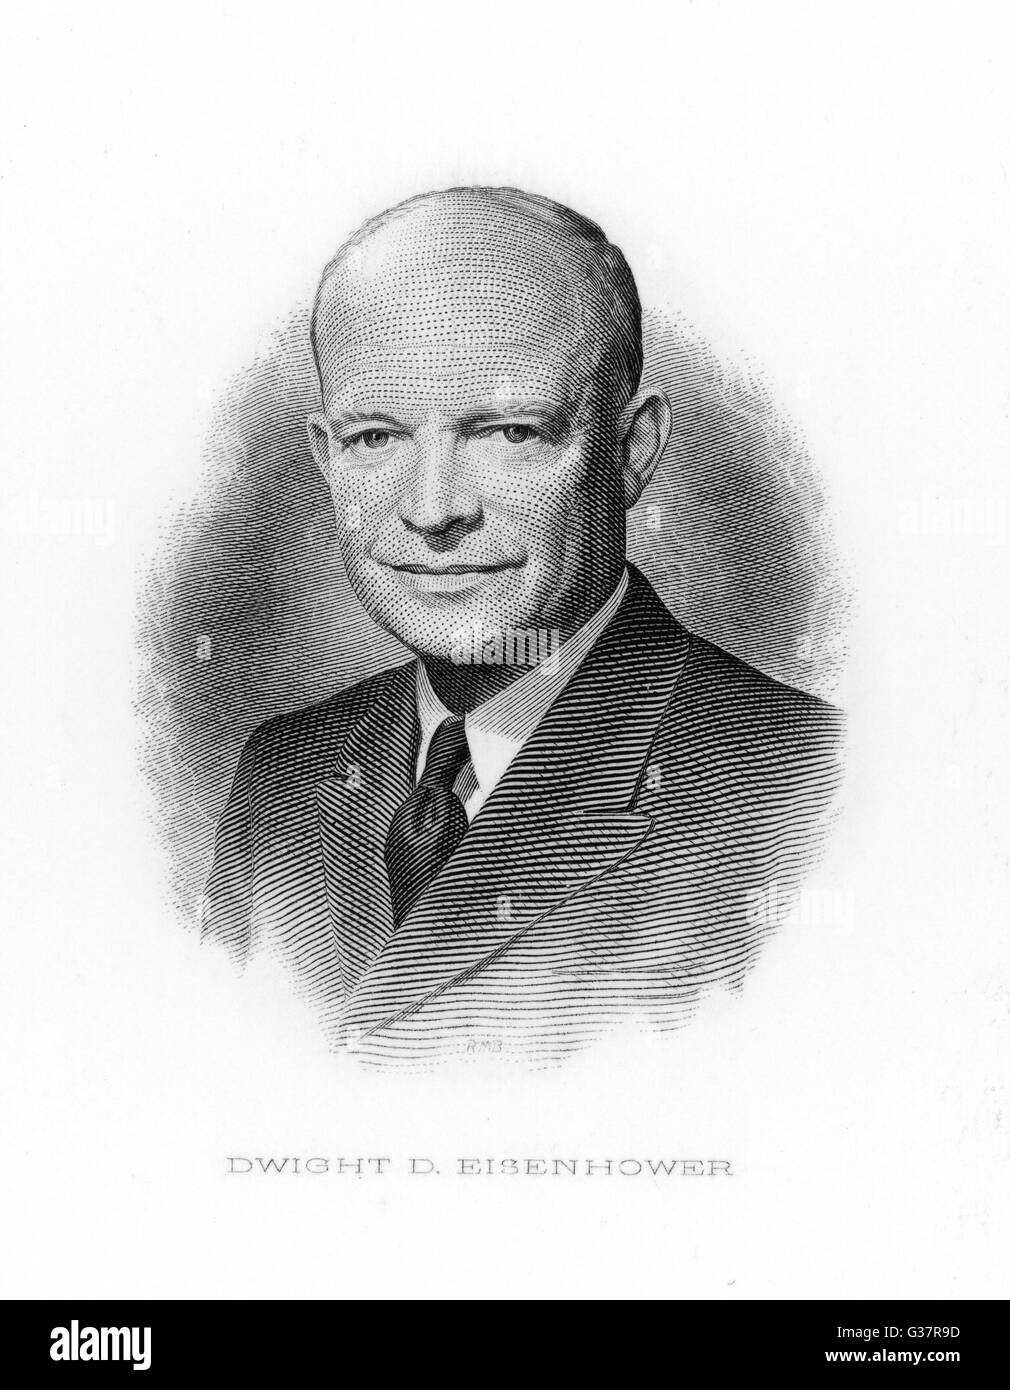 DWIGHT EISENHOWER  US Soldier and President  1953 - 1961.       Date: 1890 - 1969 Stock Photo